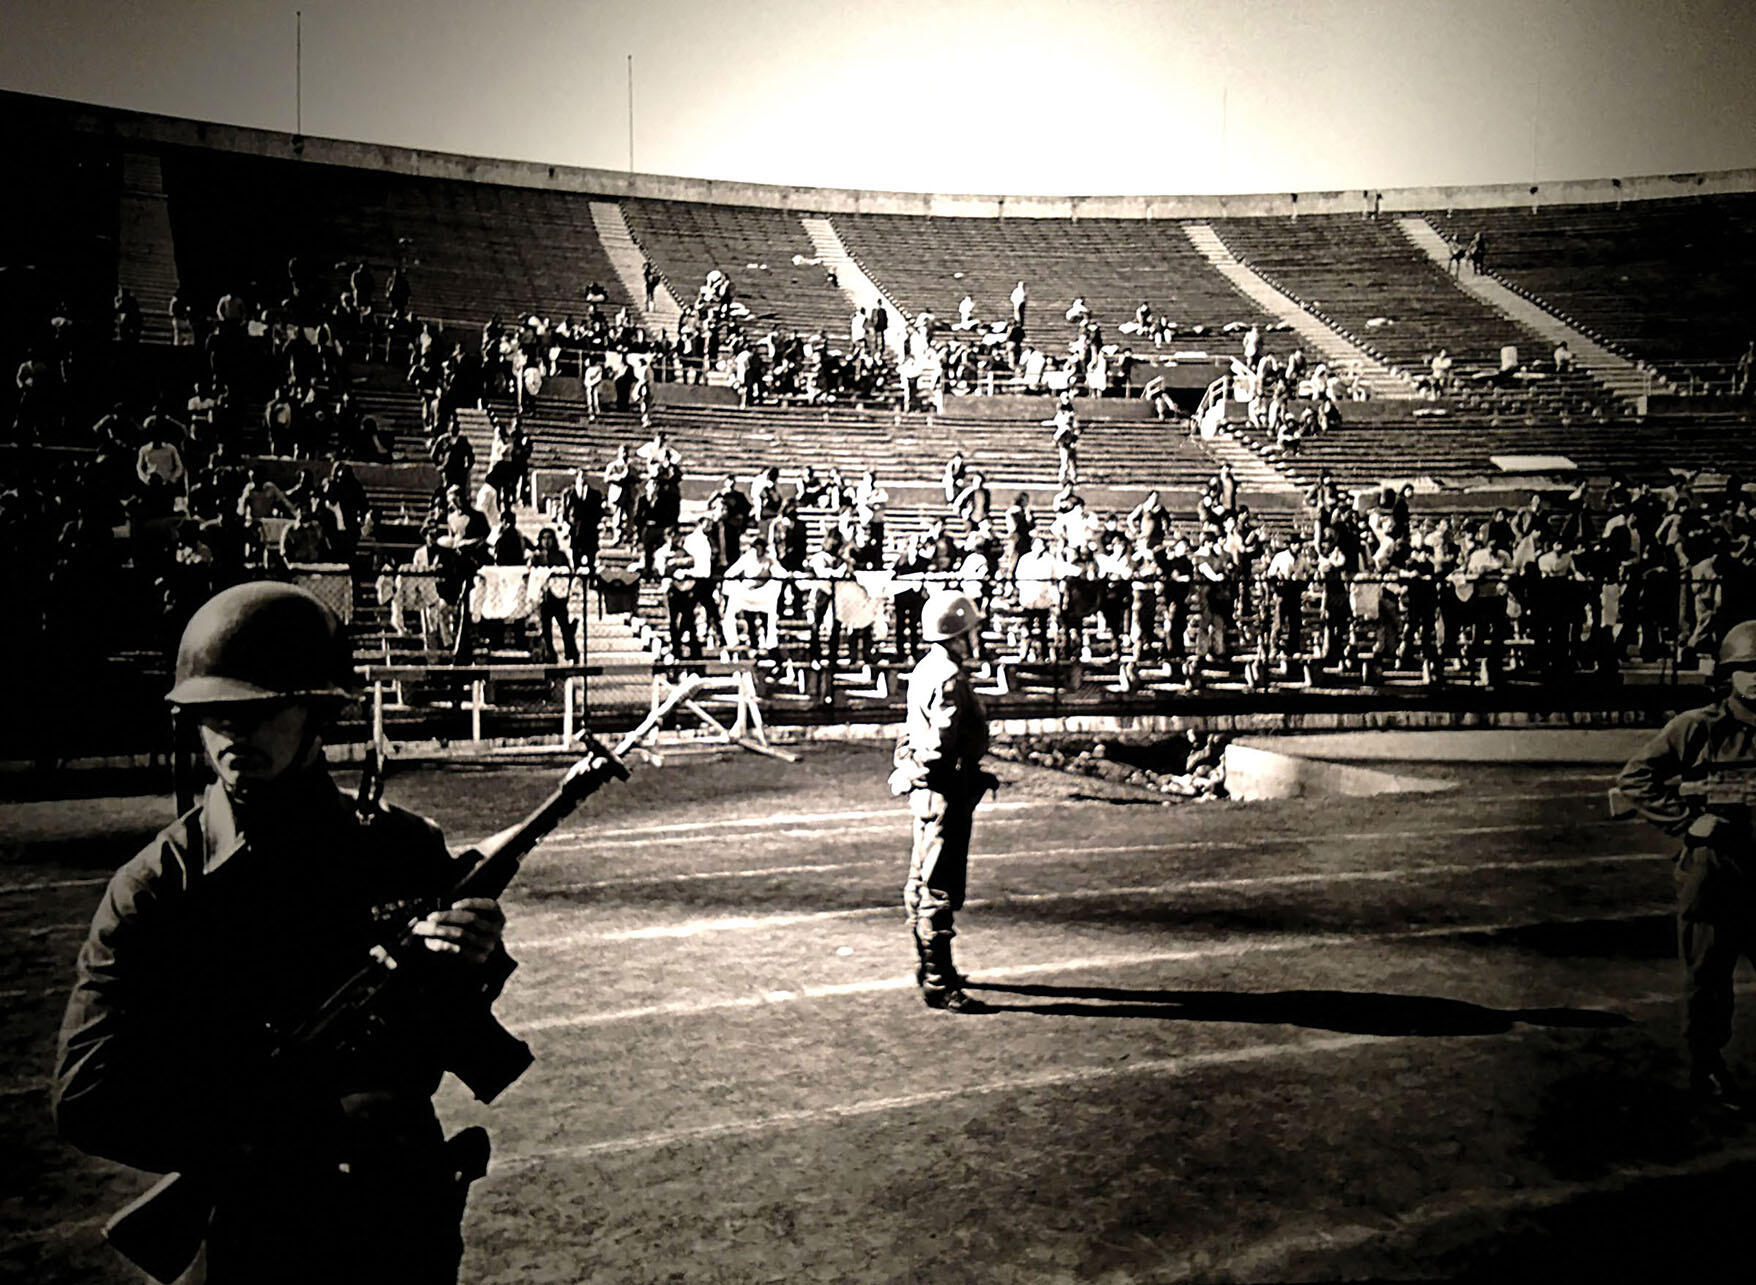 Crowds of people in the stands guarded by soldiers inside the Estadio Nacional during the coup in 1973. (Photo from El Sol, Argentina.)